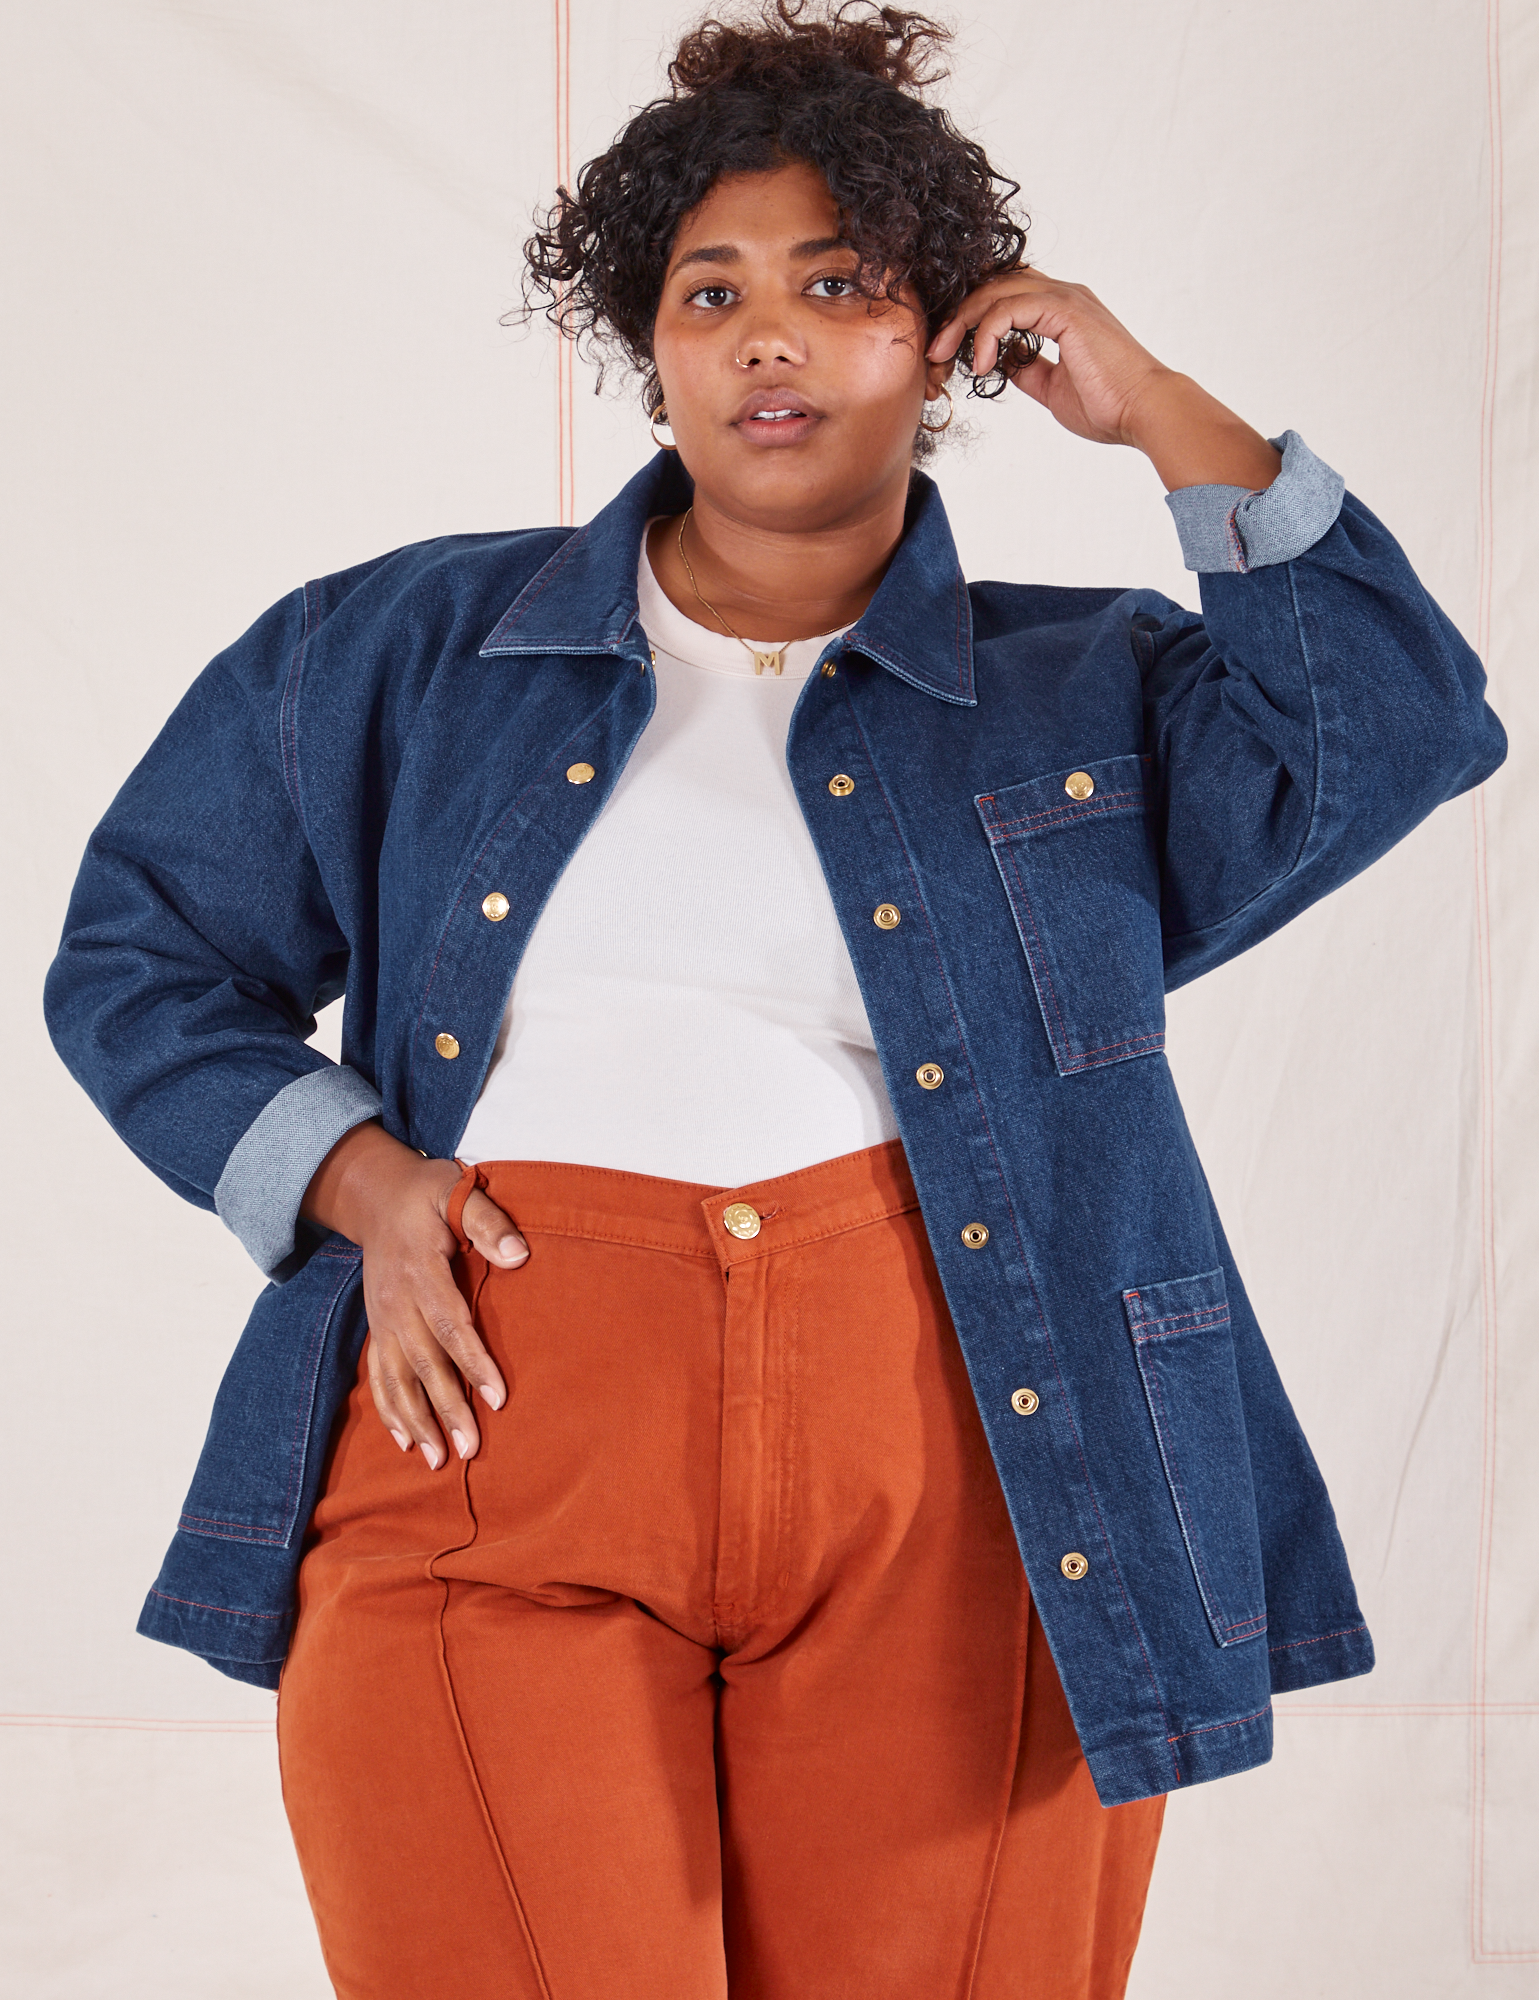 Morgan is 5&#39;5&quot; and wearing 1XL Indigo Denim Work Jacket in Dark Wash paired with a vintage off-white Baby Tee and burnt terracotta Western Pants